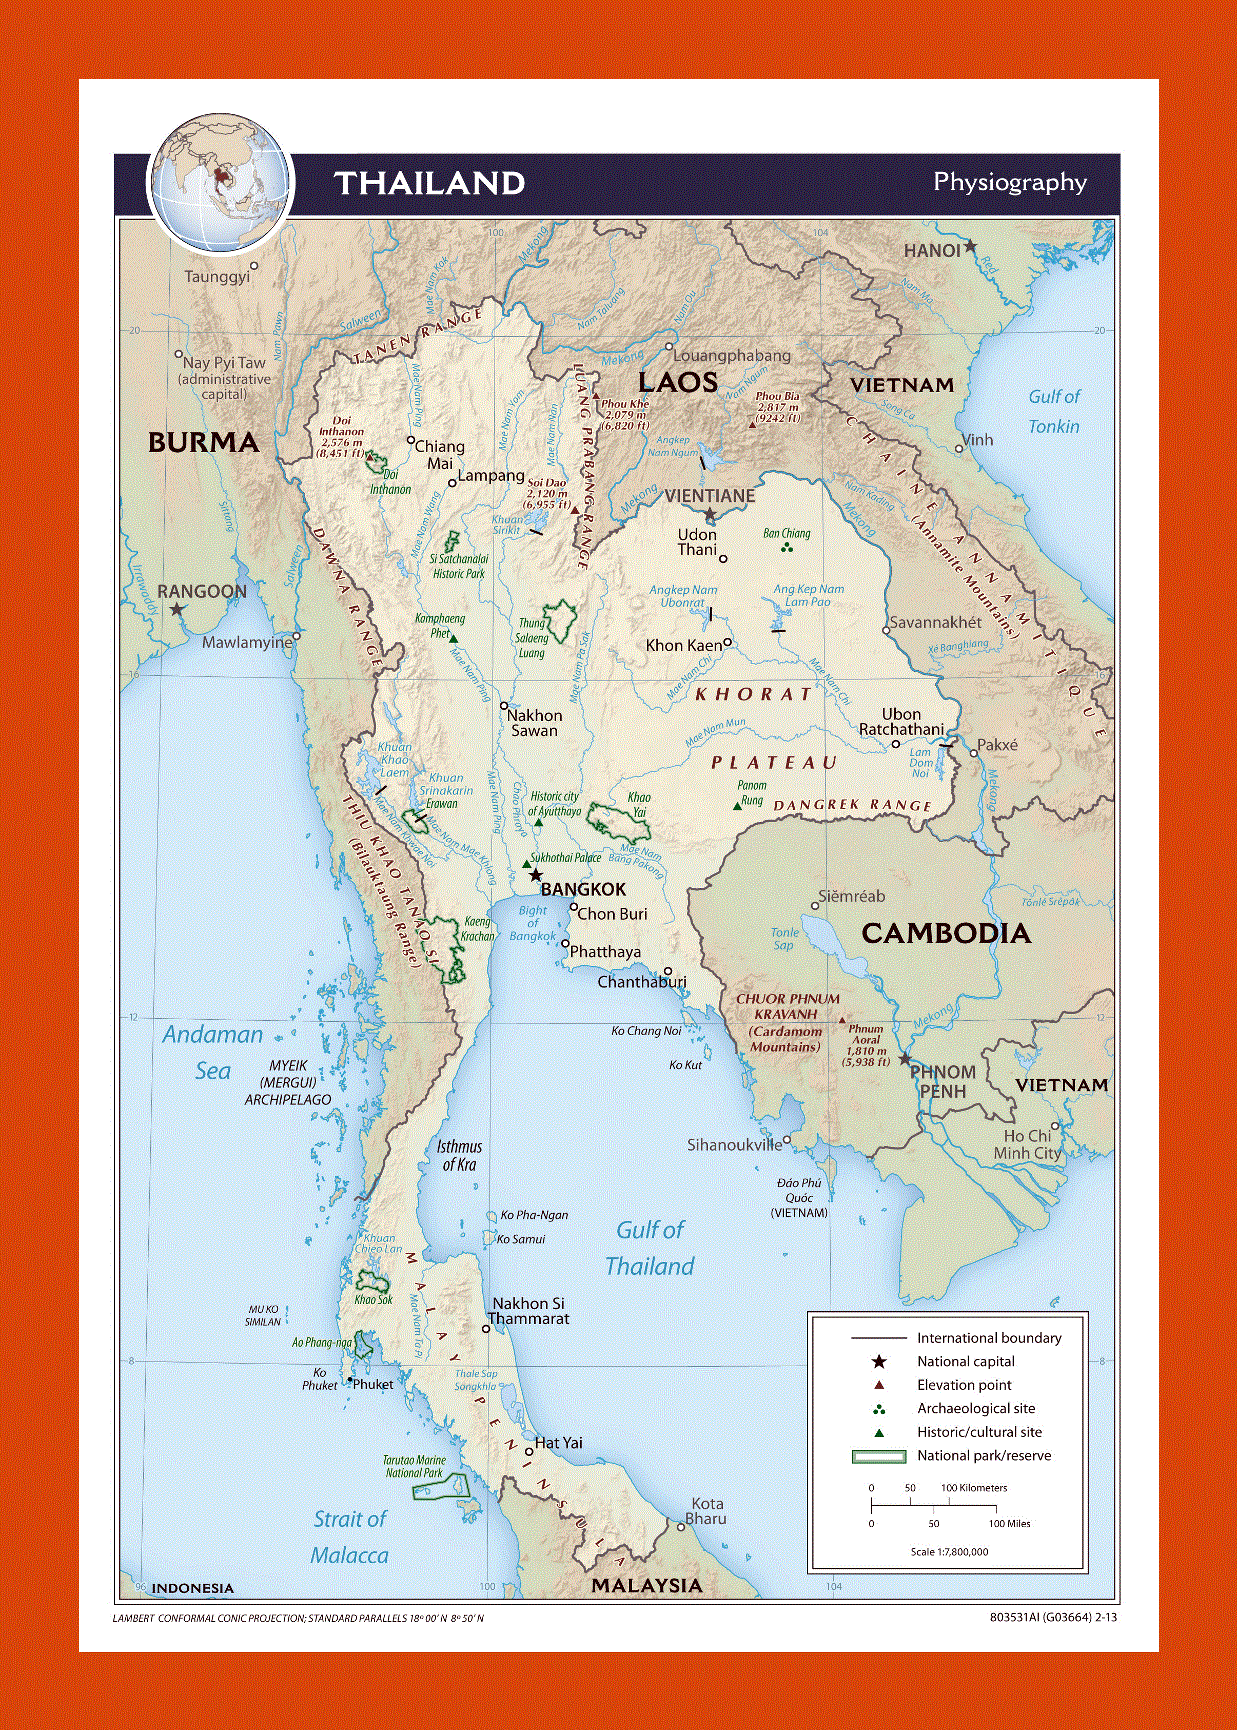 Physiography map of Thailand - 2013